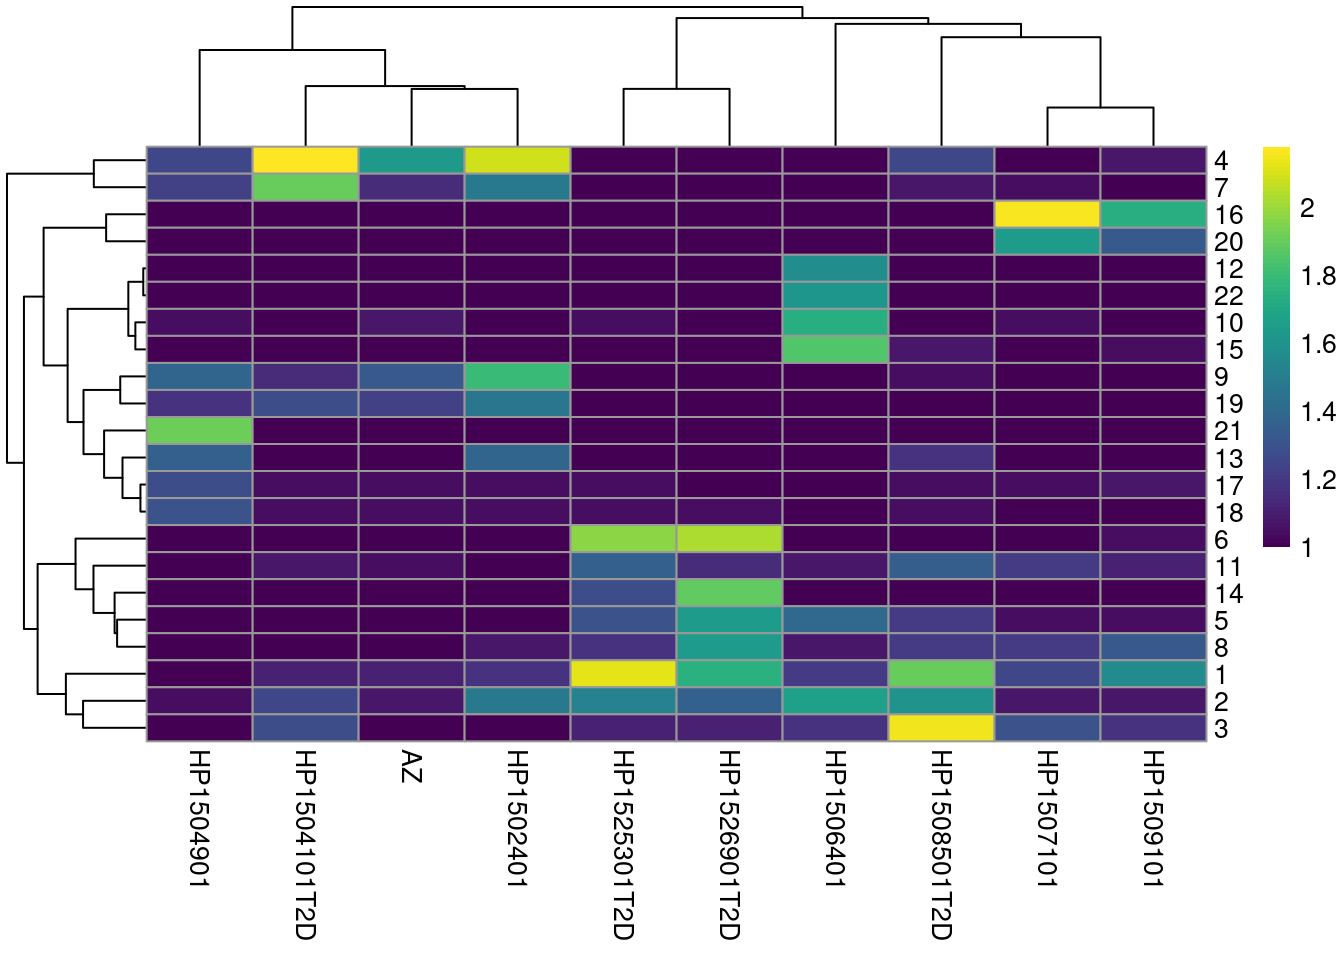 Heatmap of the frequency of cells from each donor in each cluster.